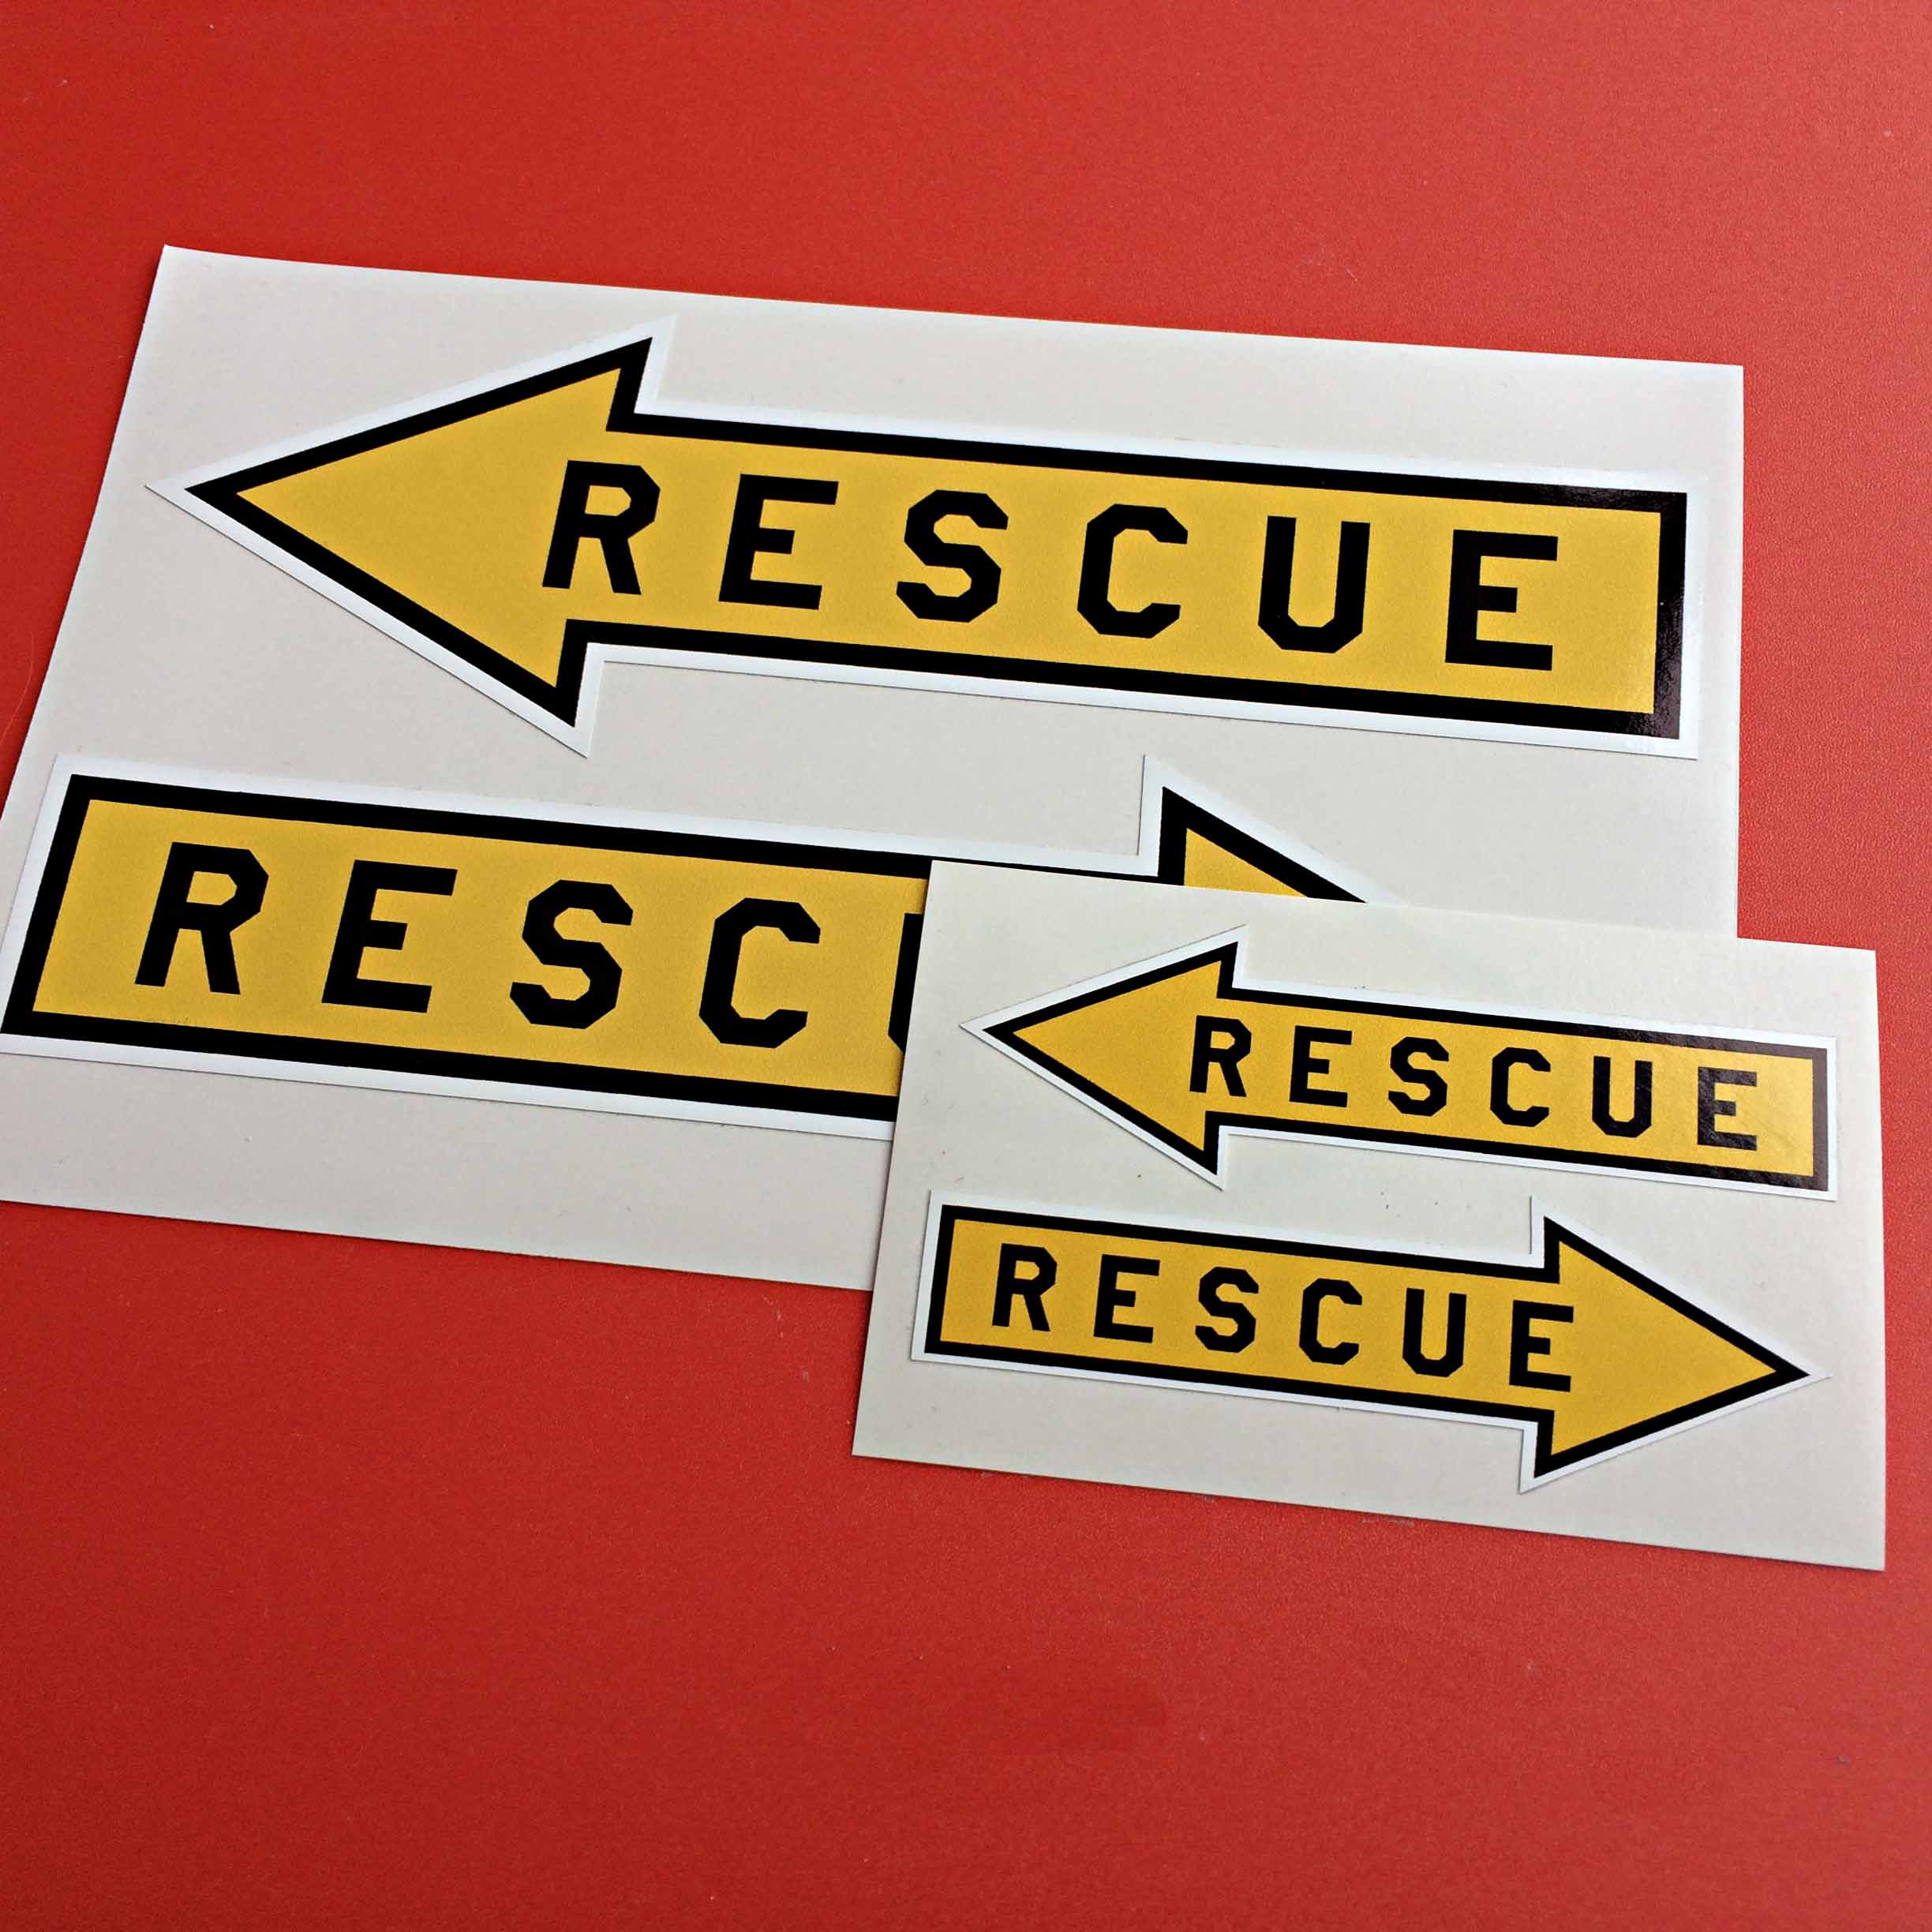 RESCUE MODEL AIRCRAFT STICKERS - 2 SIZES AVAILABLE. Rescue in black lettering on a yellow arrow.